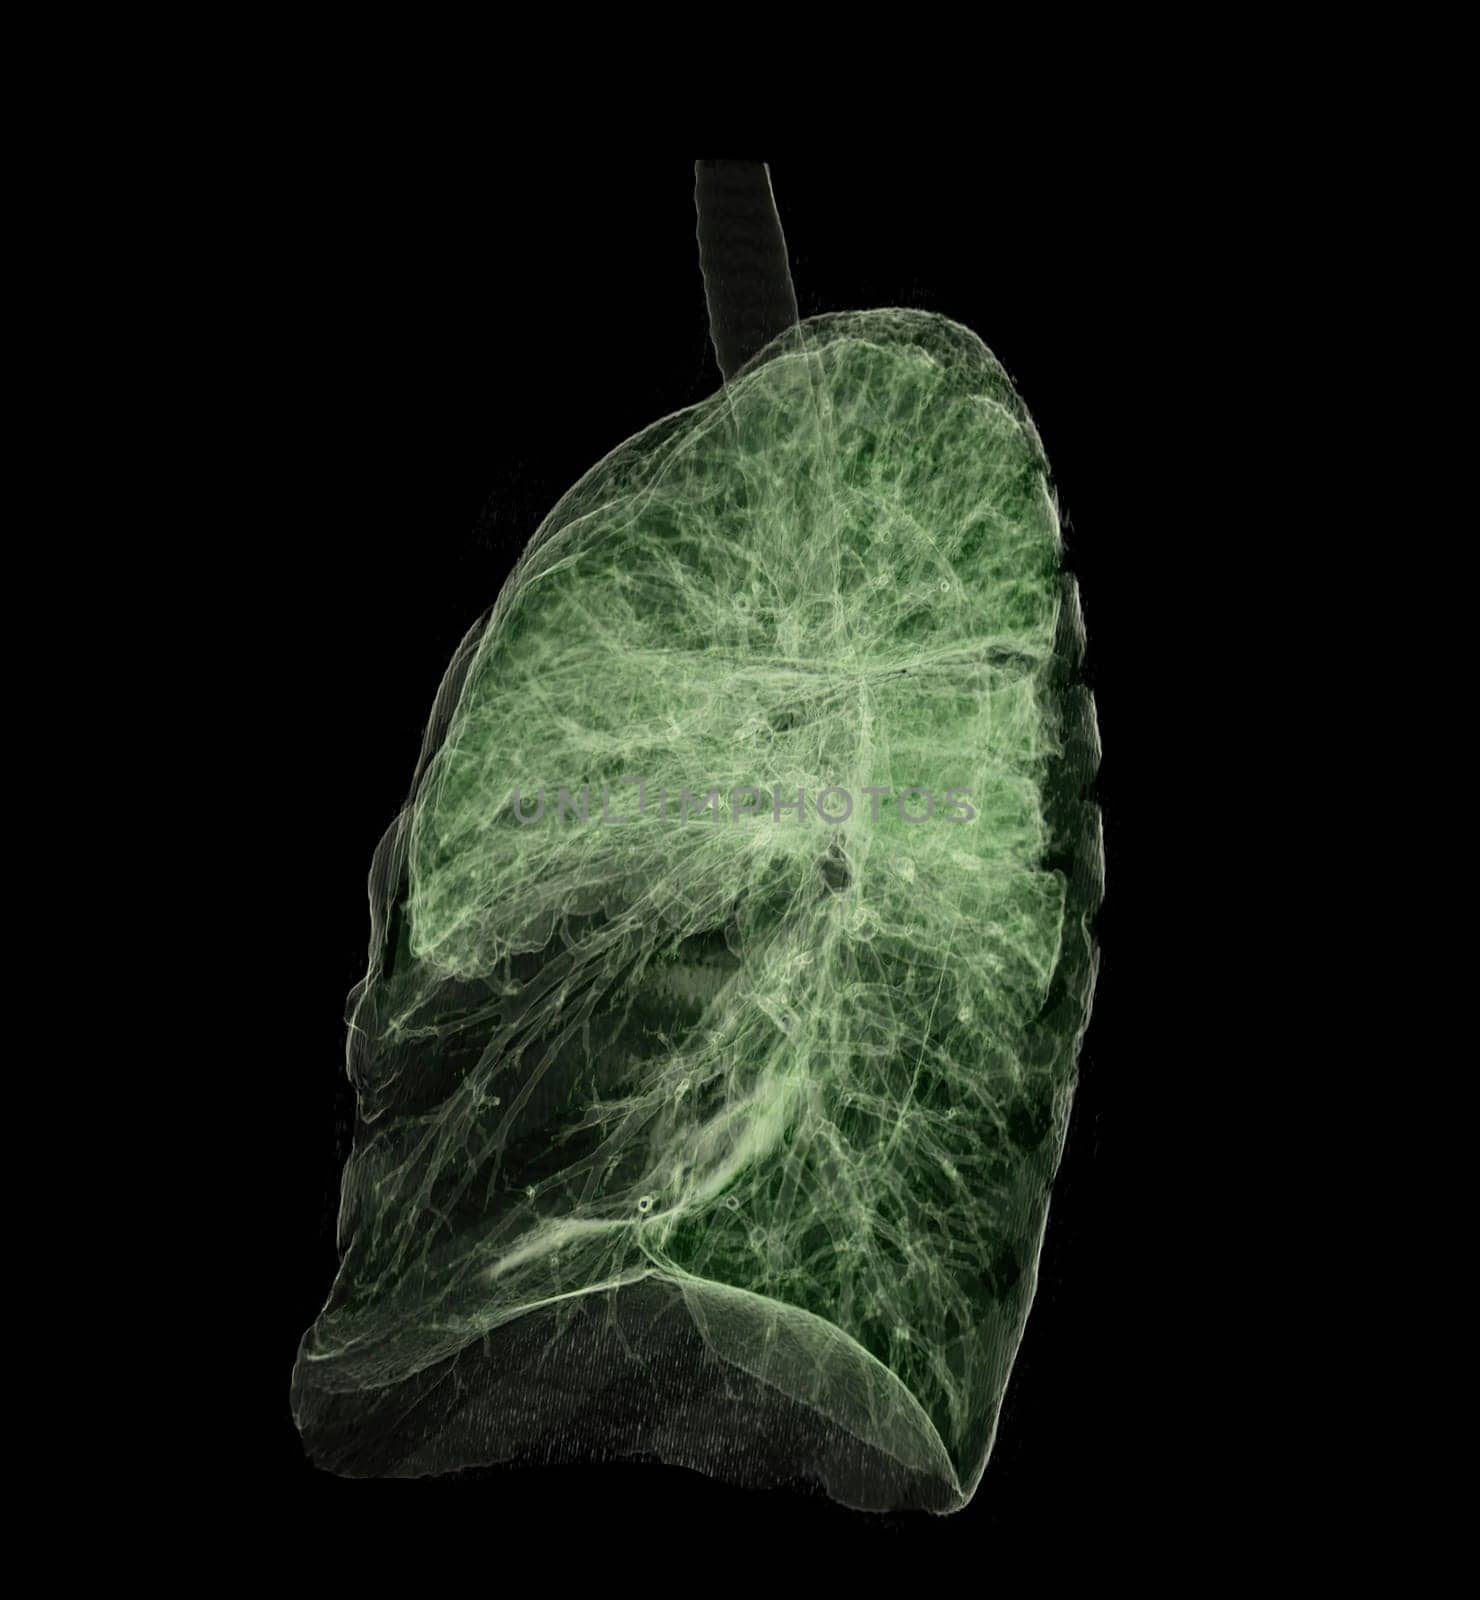 CT Chest or Lung 3D rendering image for diagnosis TB,tuberculosis and covid-19 .